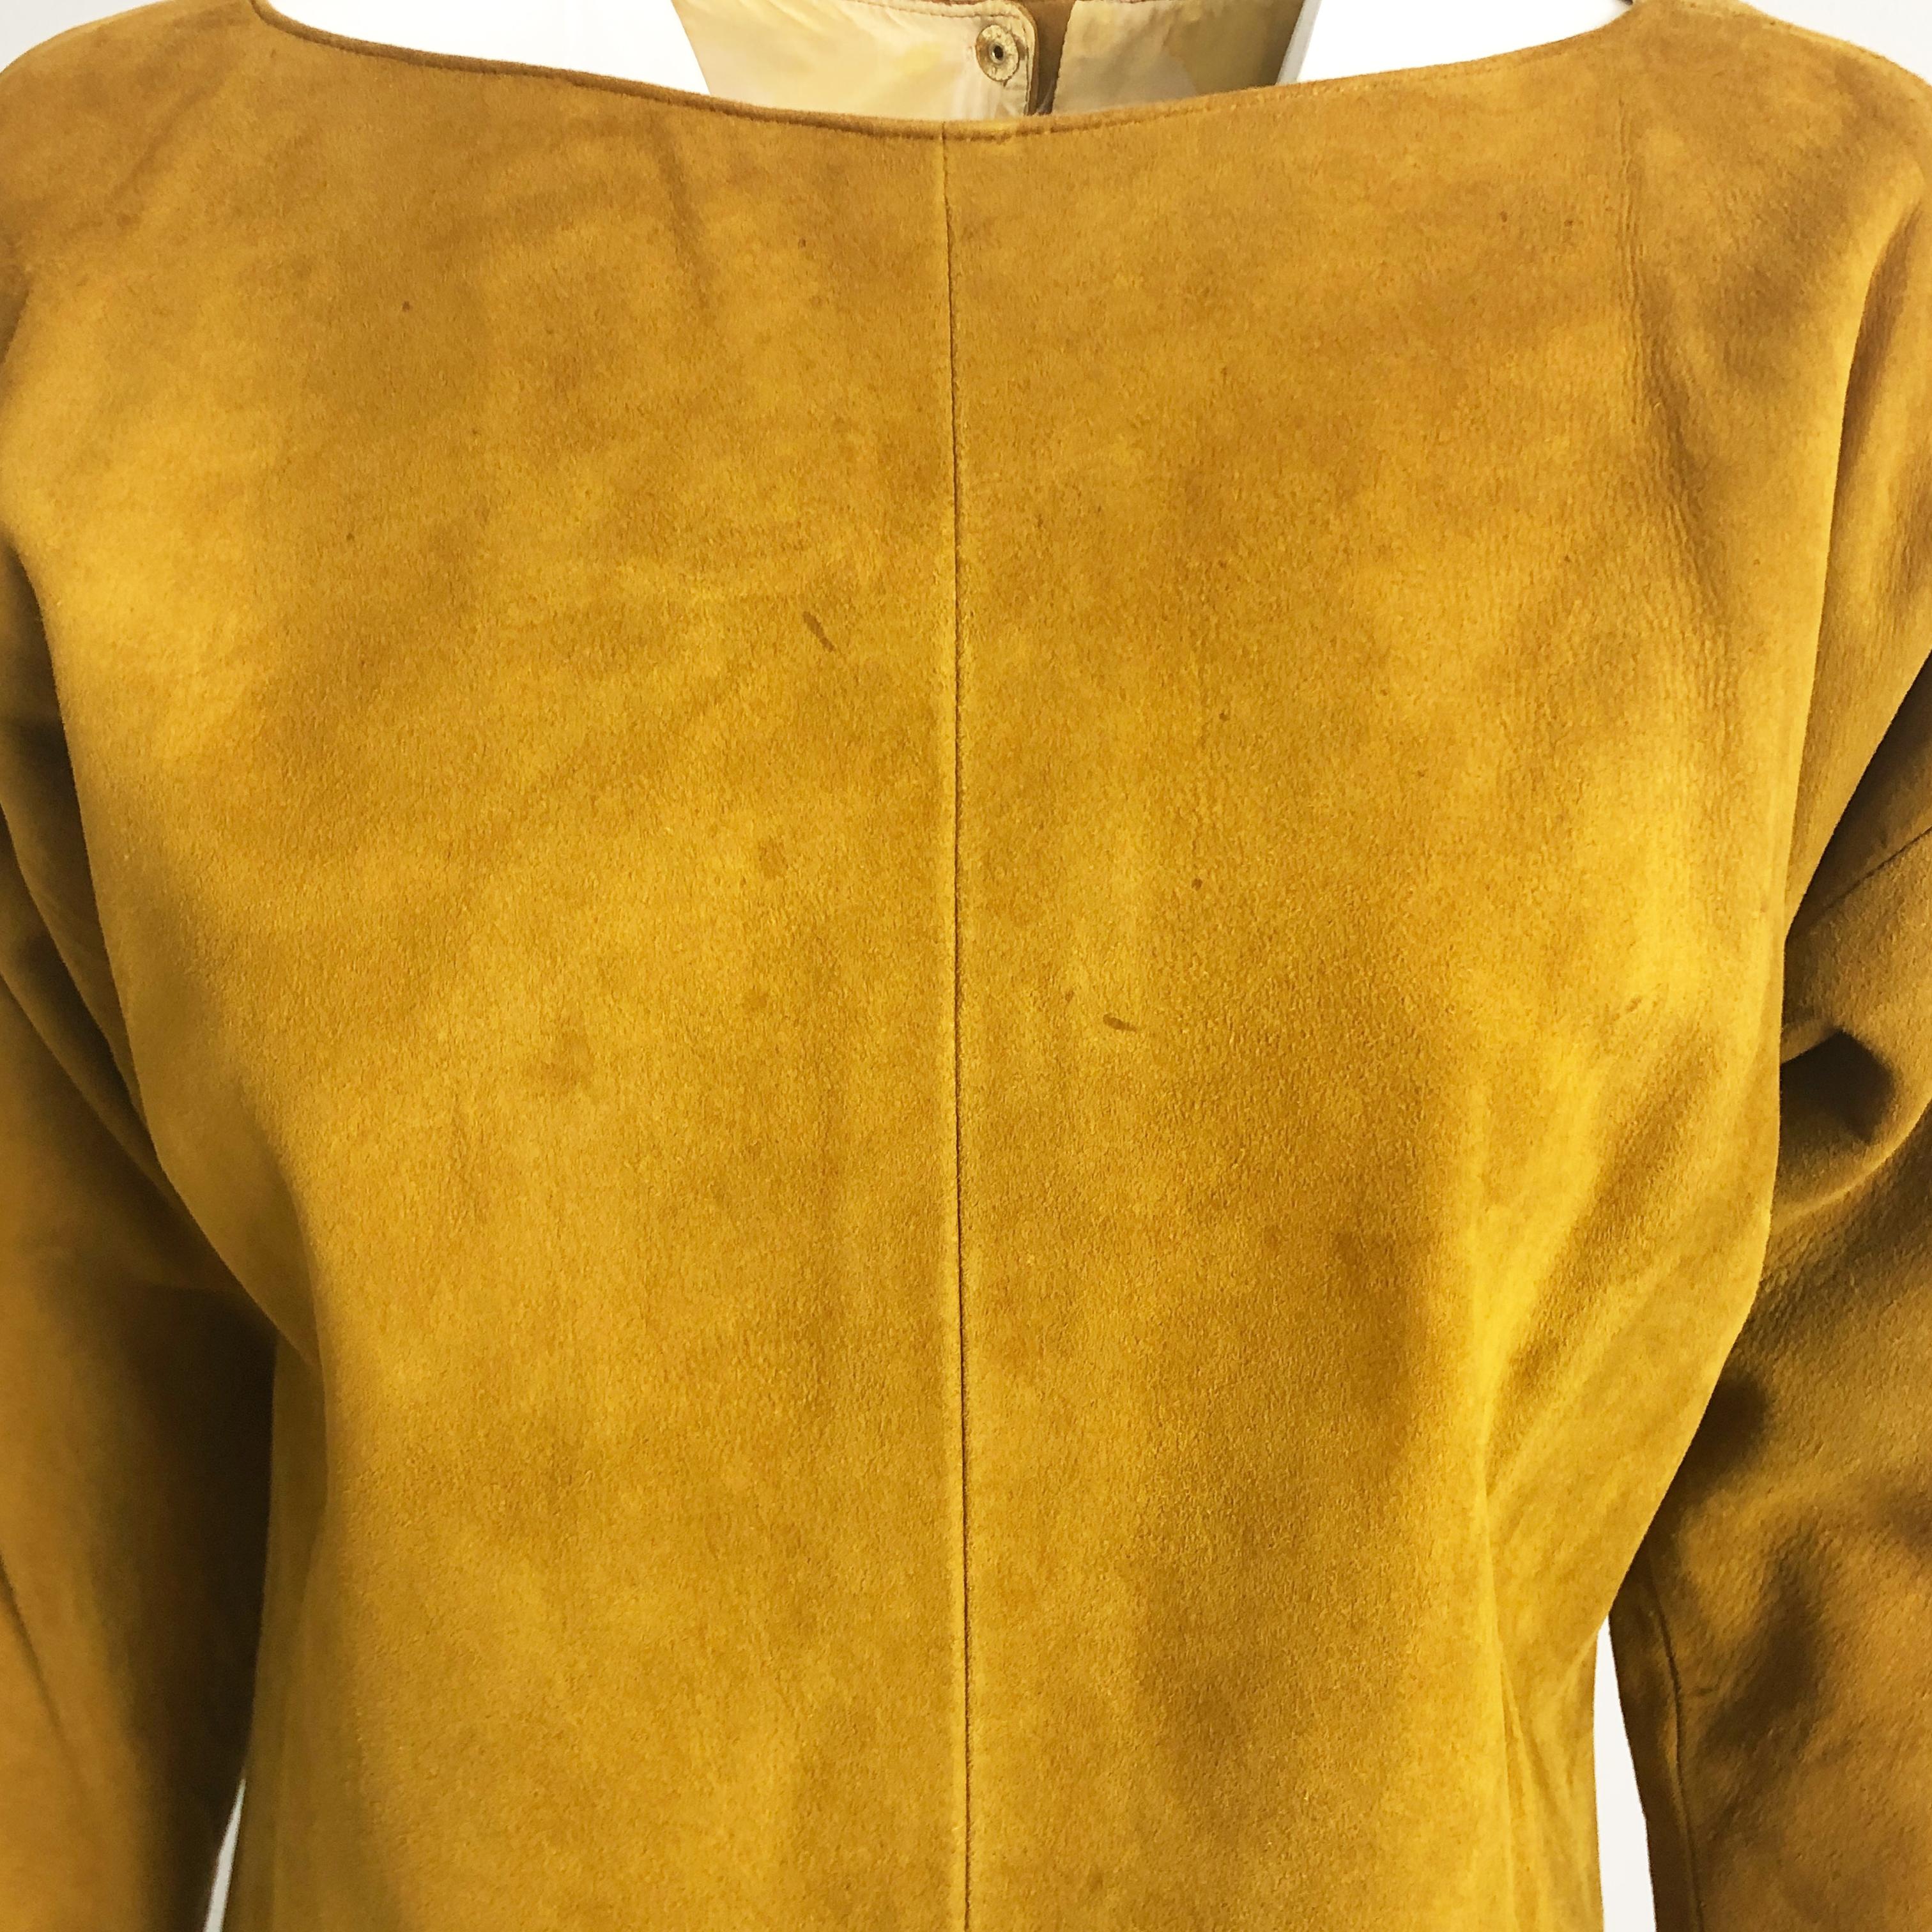 Bonnie Cashin for Sills Dress Gold Suede Leather Kimono Style Sleeves Rare 1960s In Fair Condition For Sale In Port Saint Lucie, FL